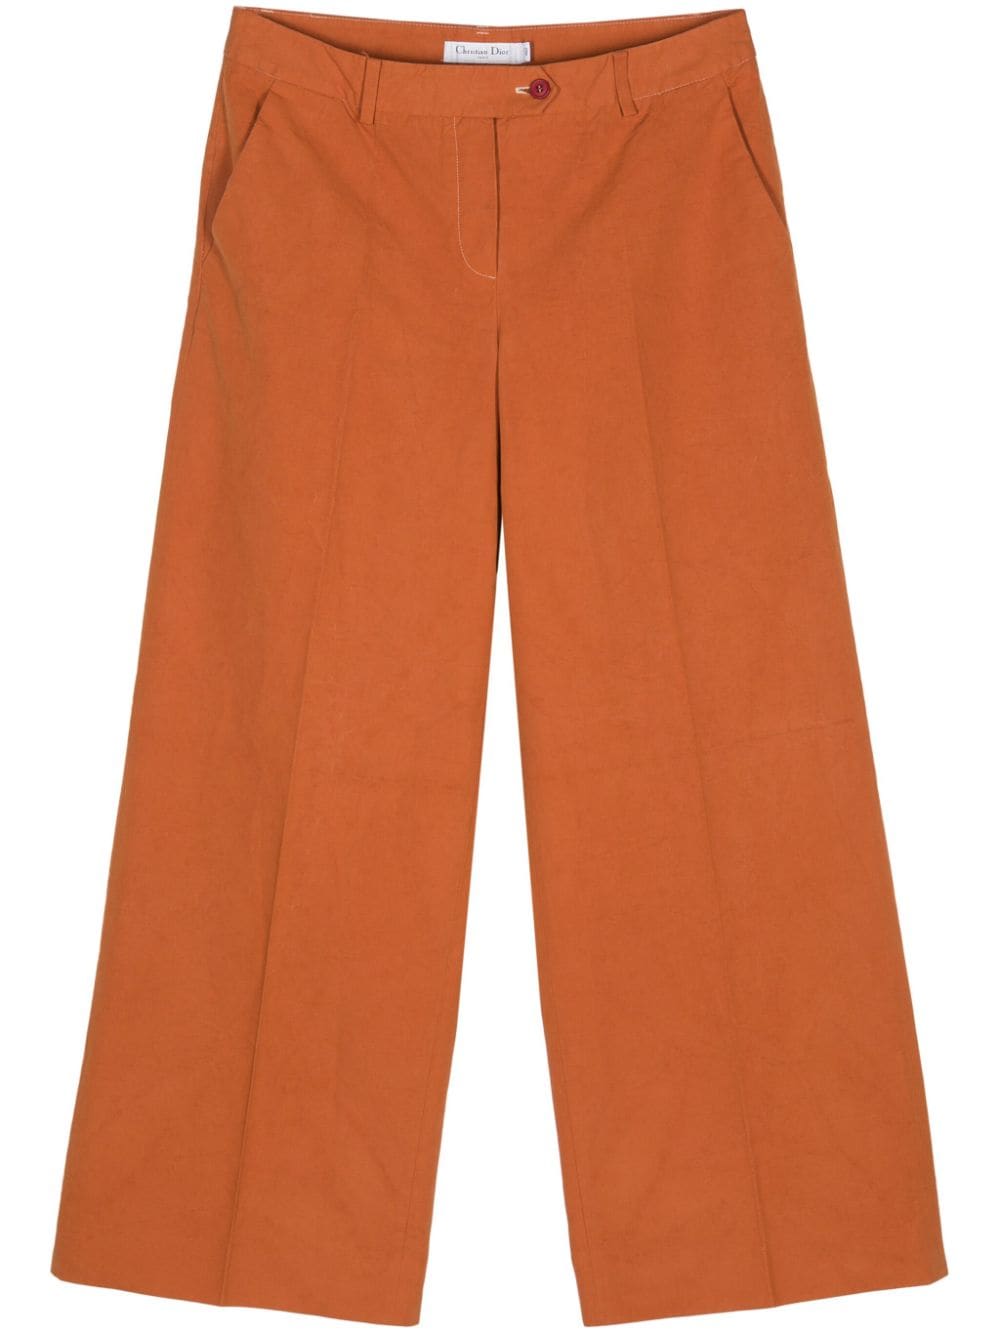 2000s pressed-crease wide trousers